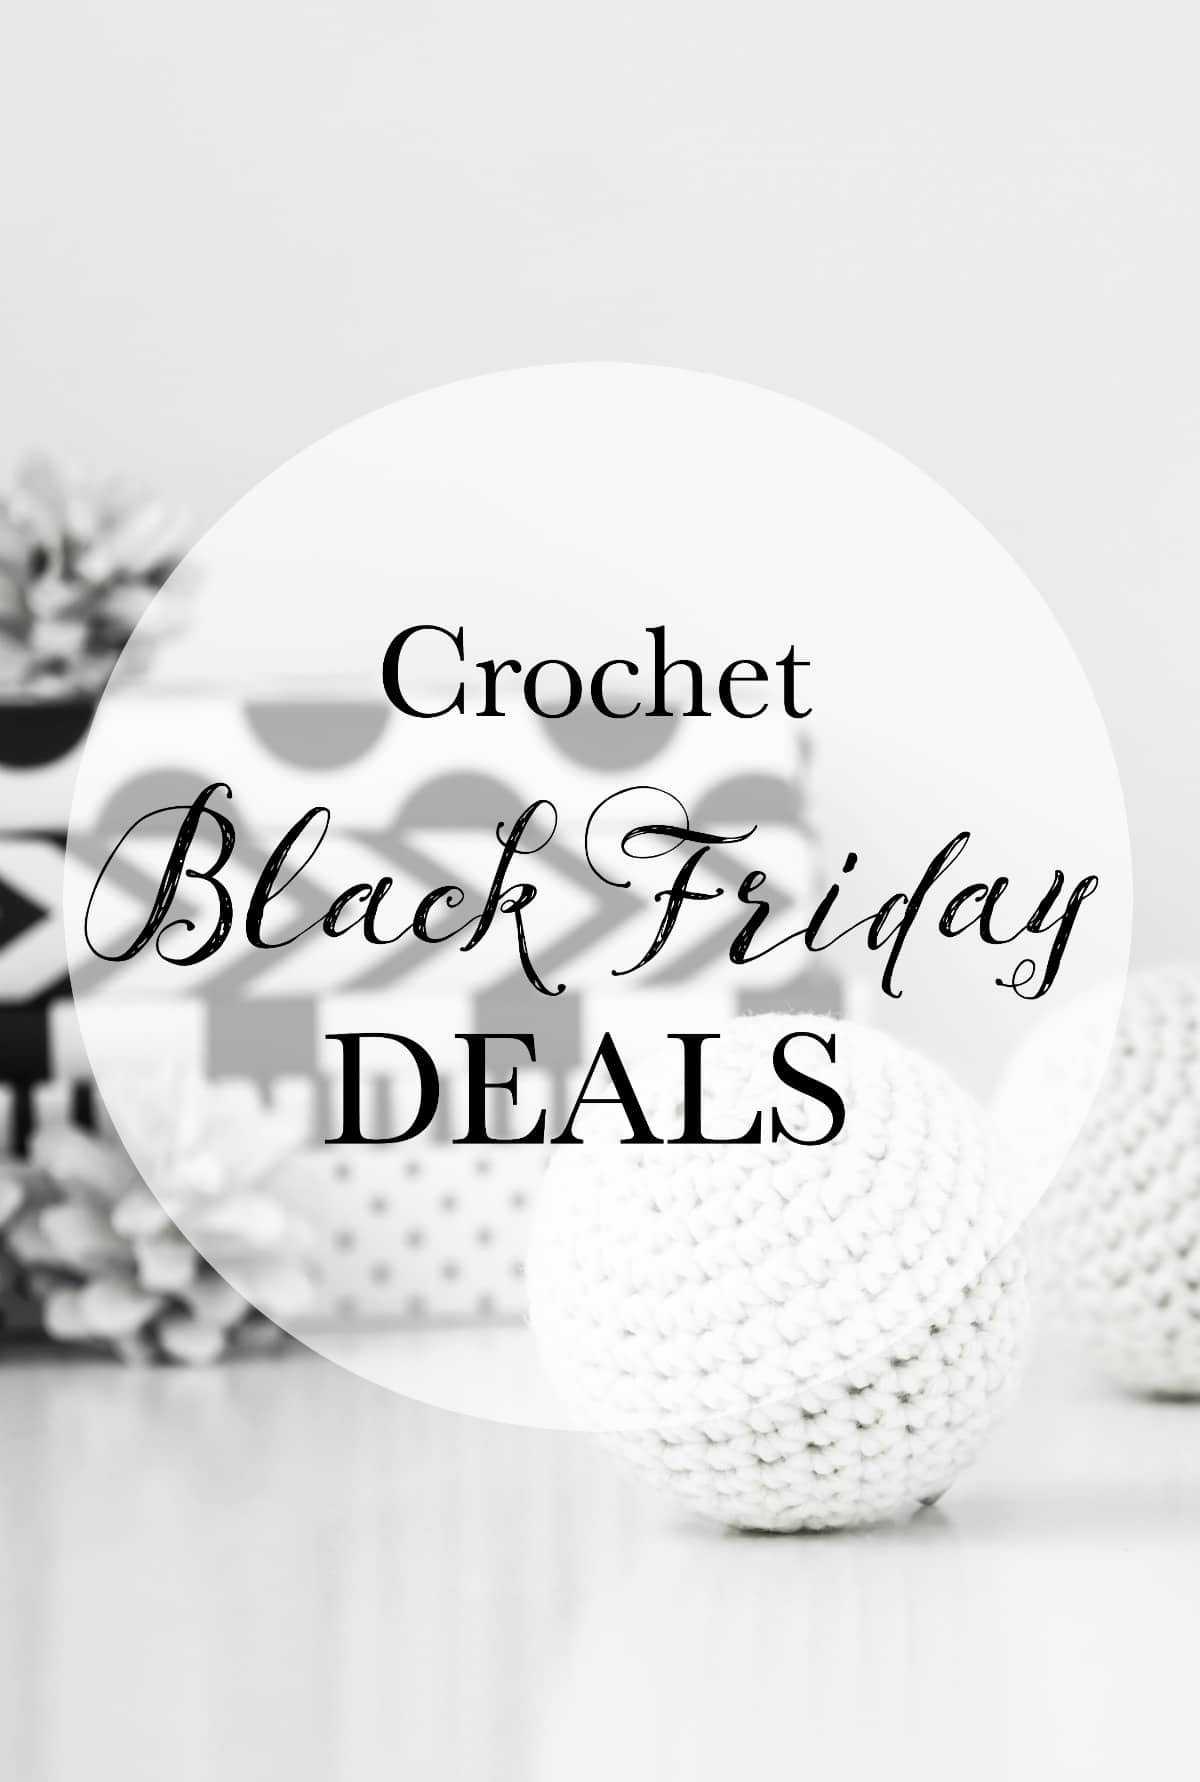 Black Friday/Cyber Monday for CROCHETERS